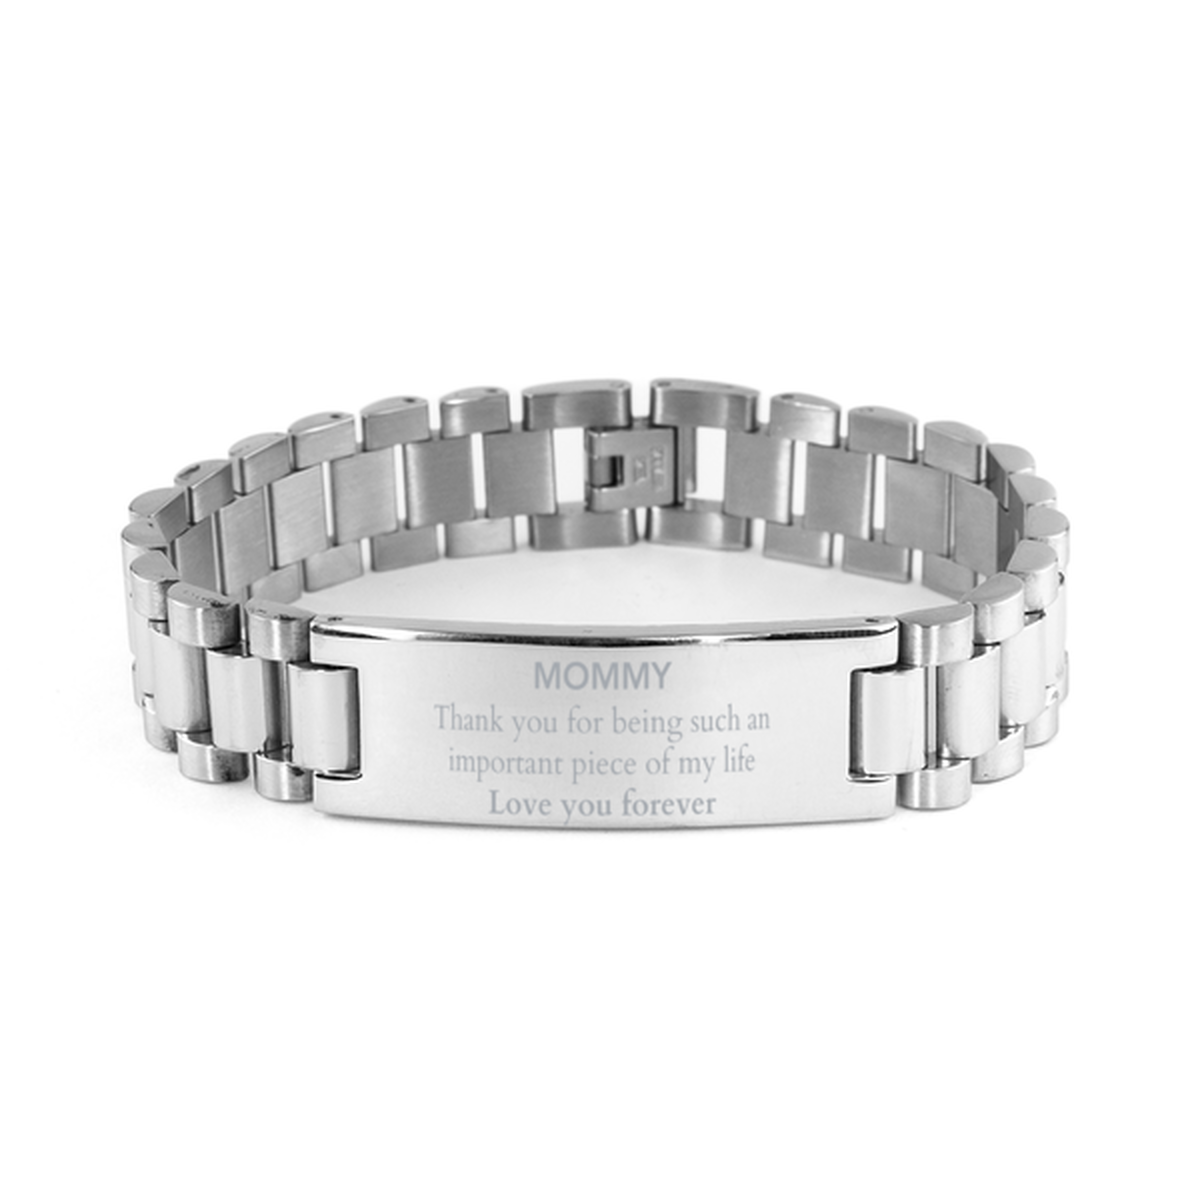 Appropriate Mommy Ladder Stainless Steel Bracelet Epic Birthday Gifts for Mommy Thank you for being such an important piece of my life Mommy Christmas Mothers Fathers Day